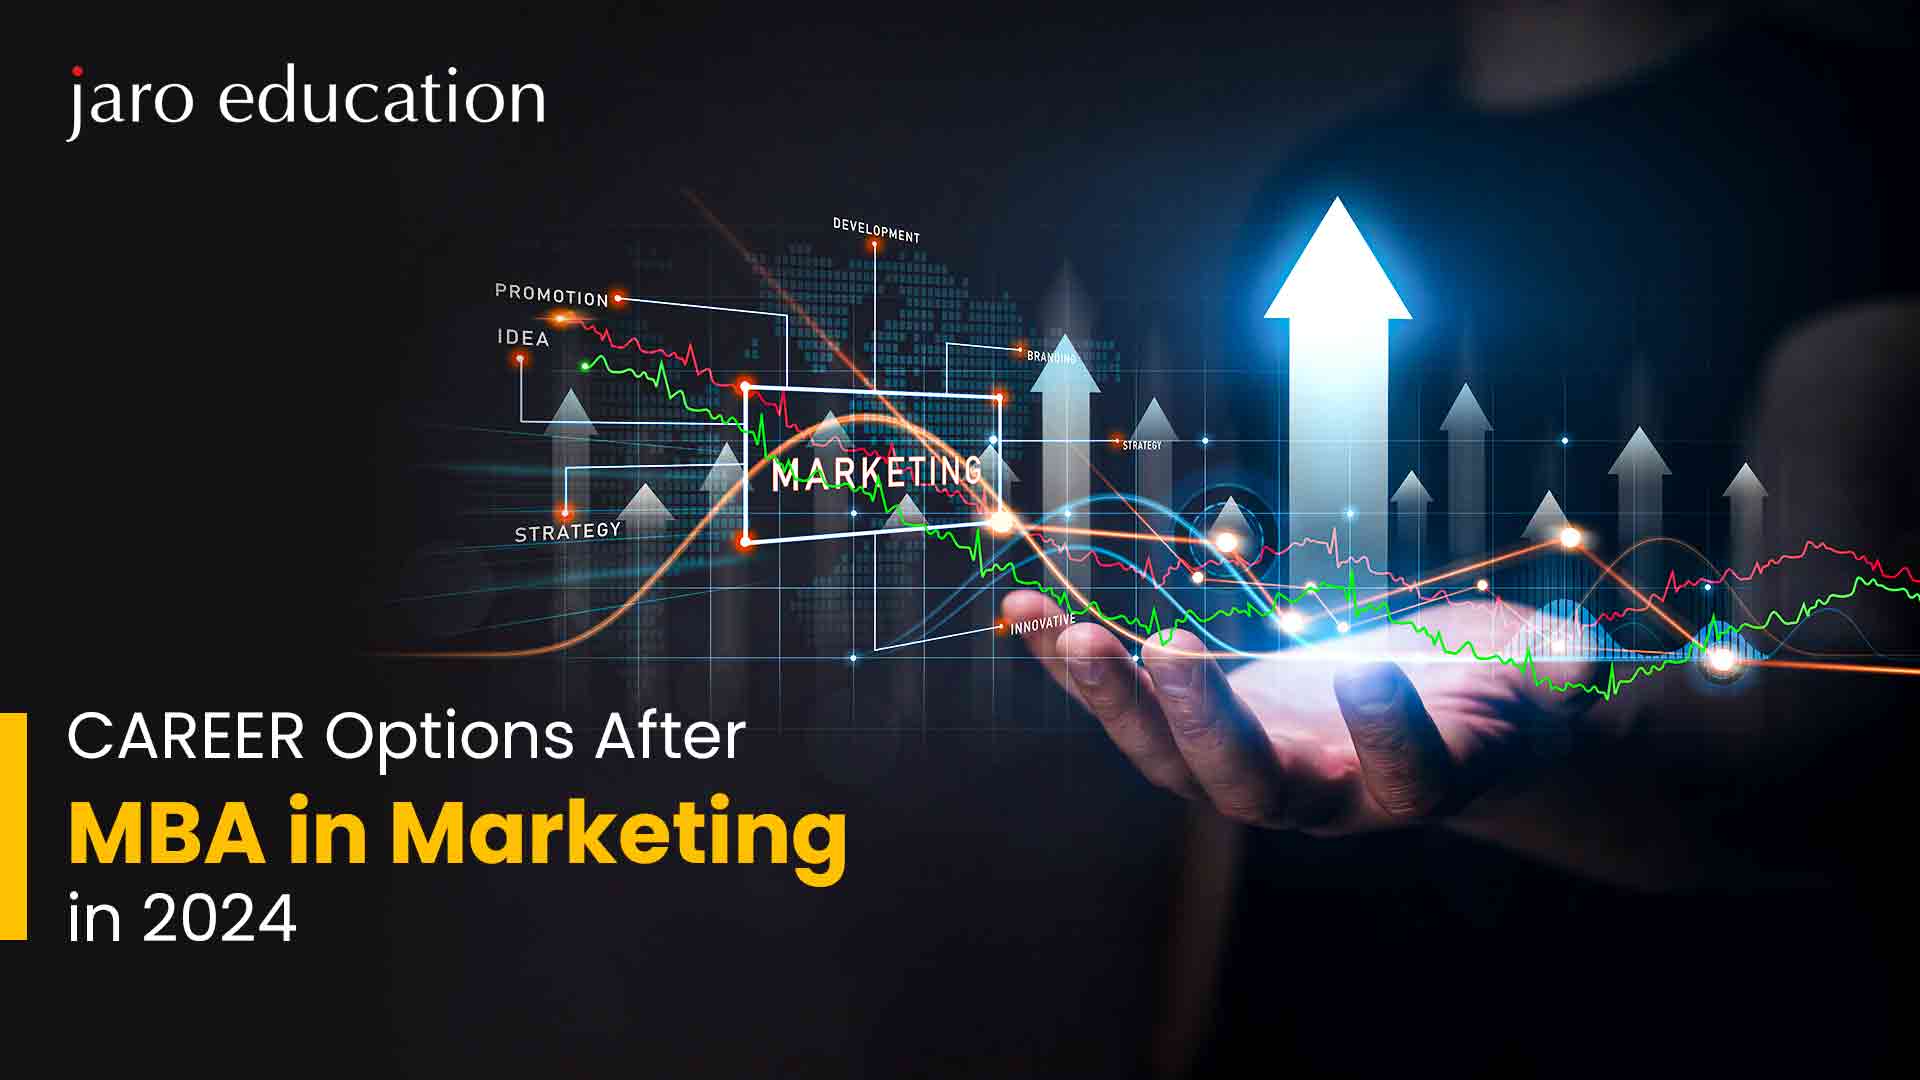 Career Options After MBA in Marketing in 2024